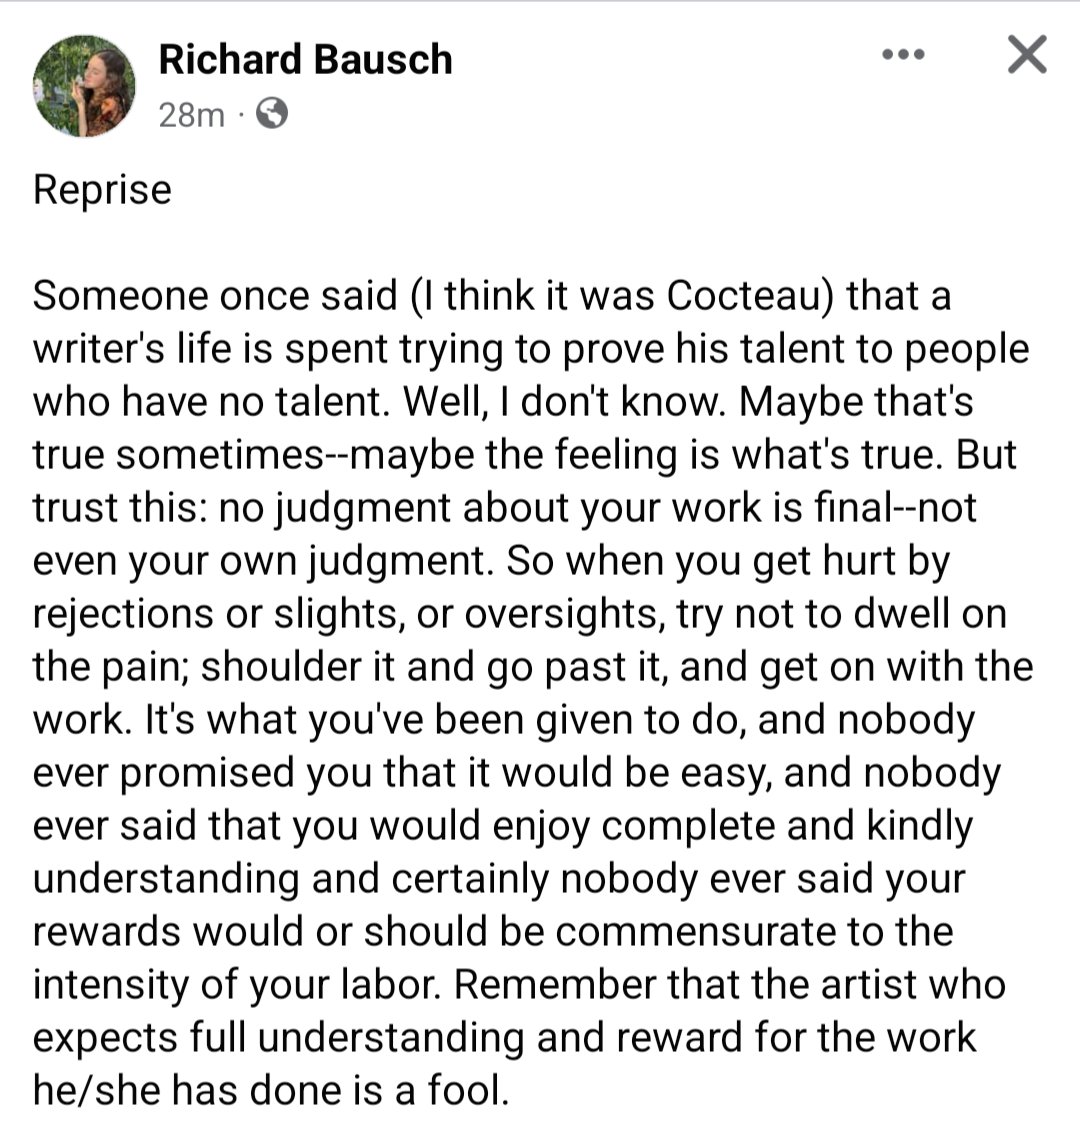 'Trust this: no judgment about your work is final--not even your own judgment. So when you get hurt by rejections or slights, or oversights, try not to dwell on the pain; shoulder it and go past it, and get on with the work.'